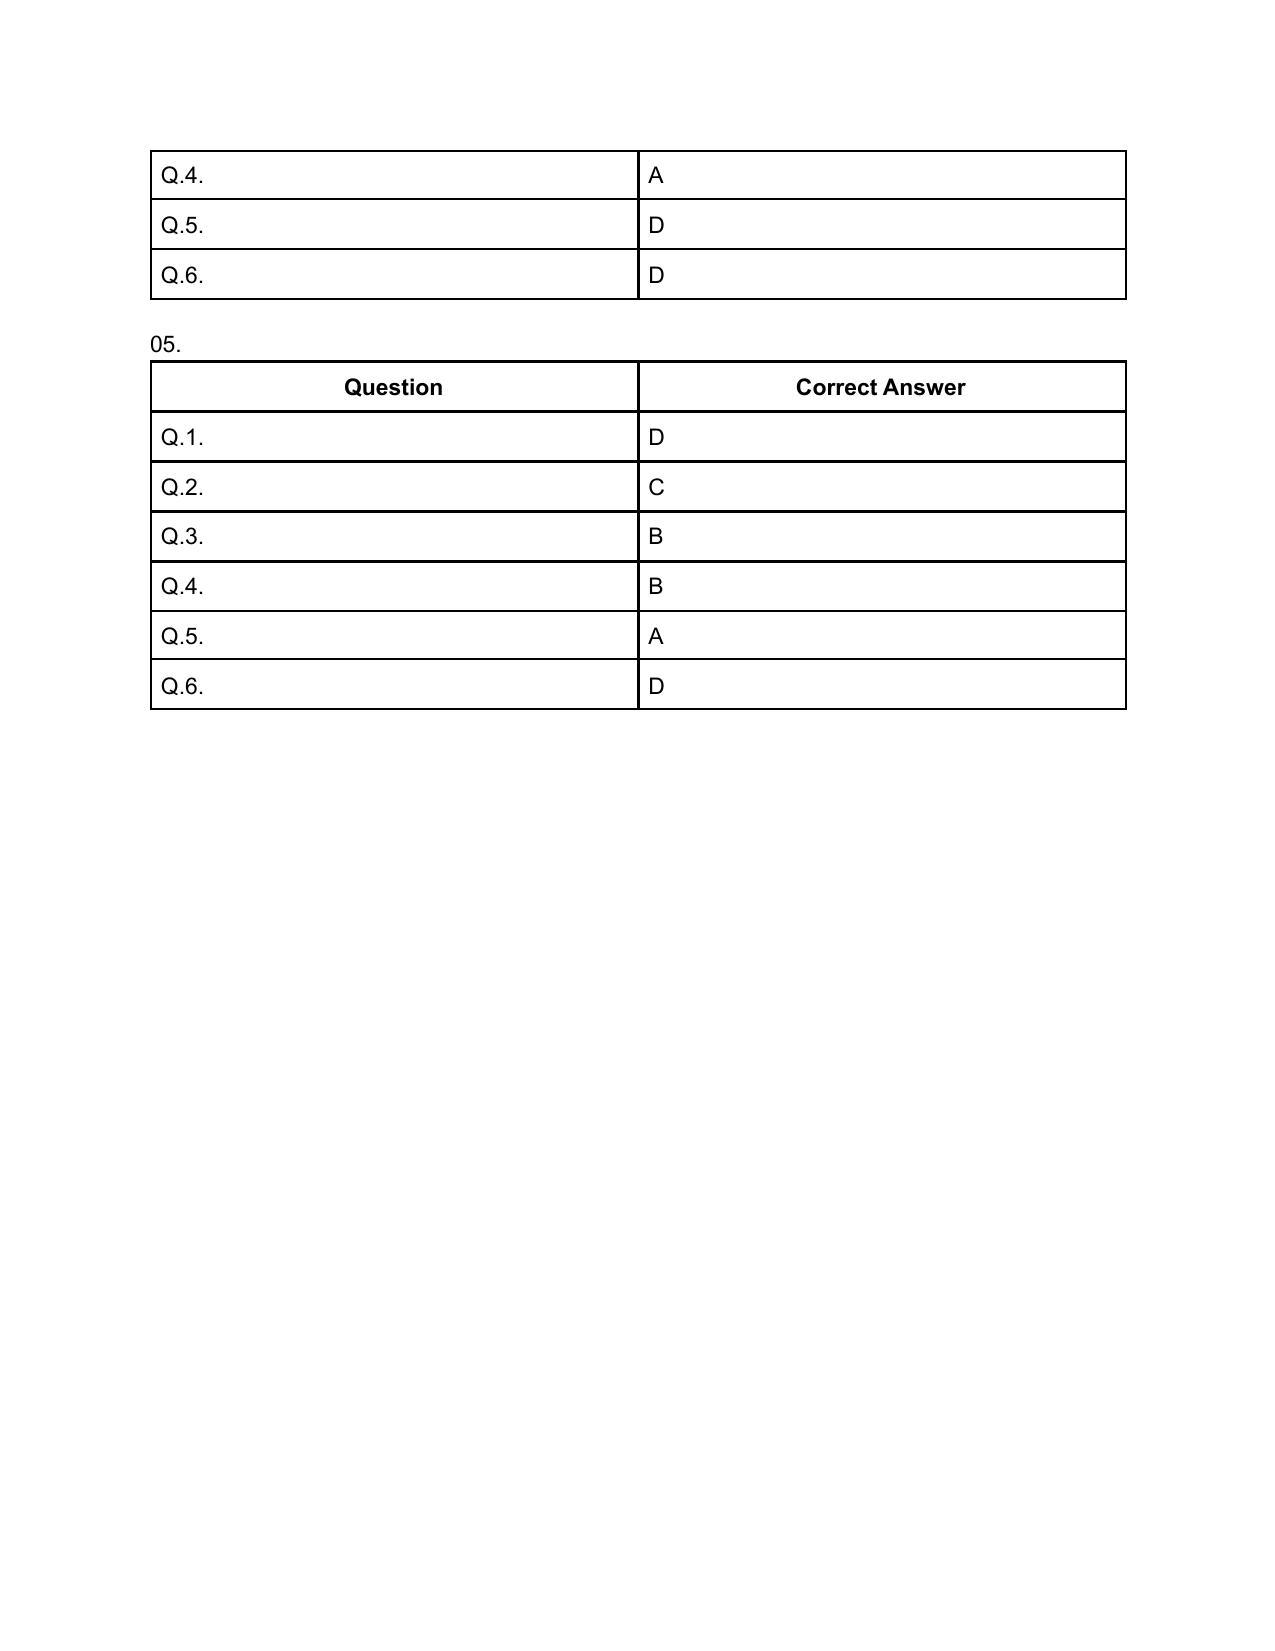 CAT 2020 CAT DILR Slot 2 Answer Key - Page 2